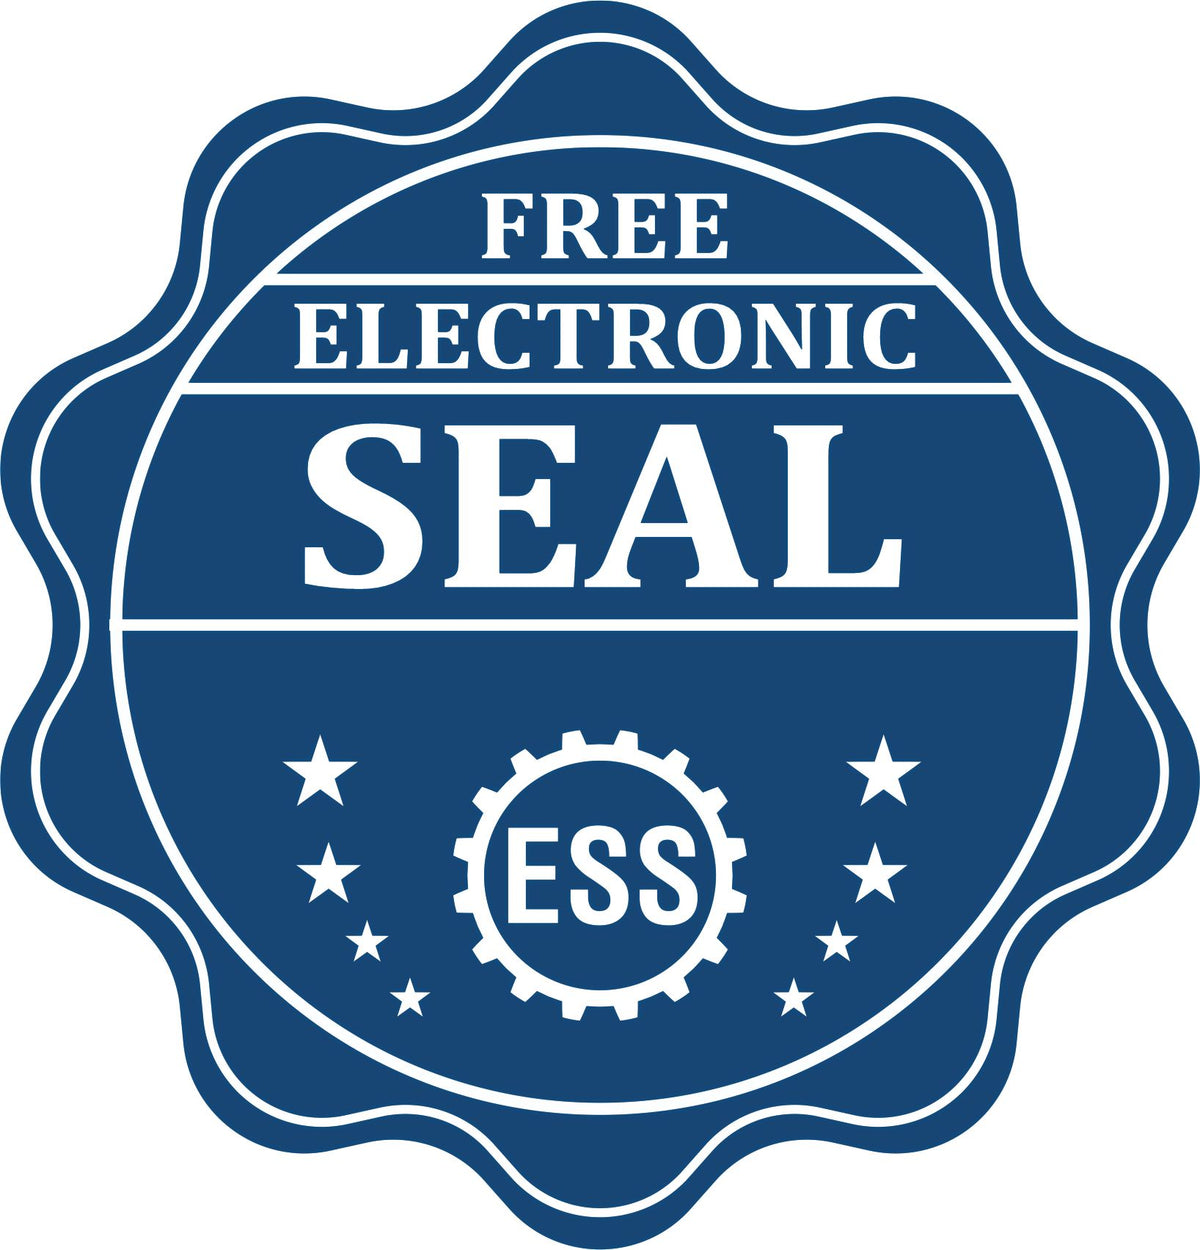 A badge showing a free electronic seal for the Soft Massachusetts Professional Geologist Seal with stars and the ESS gear on the emblem.